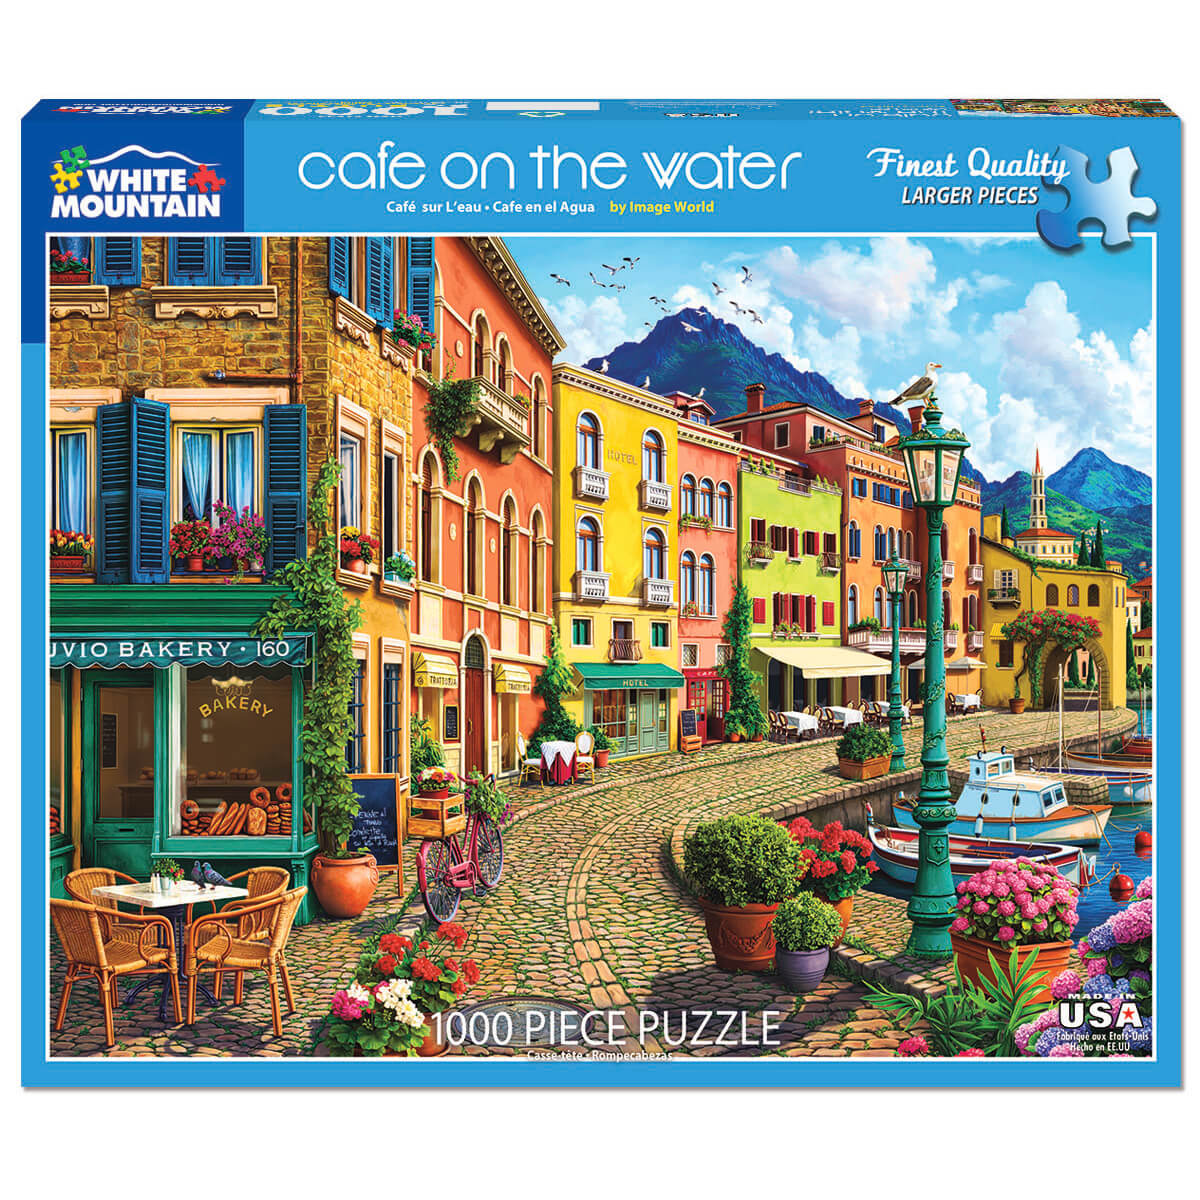 White Mountain Puzzles Cafe on the Water 1000 Piece Jigsaw Puzzle